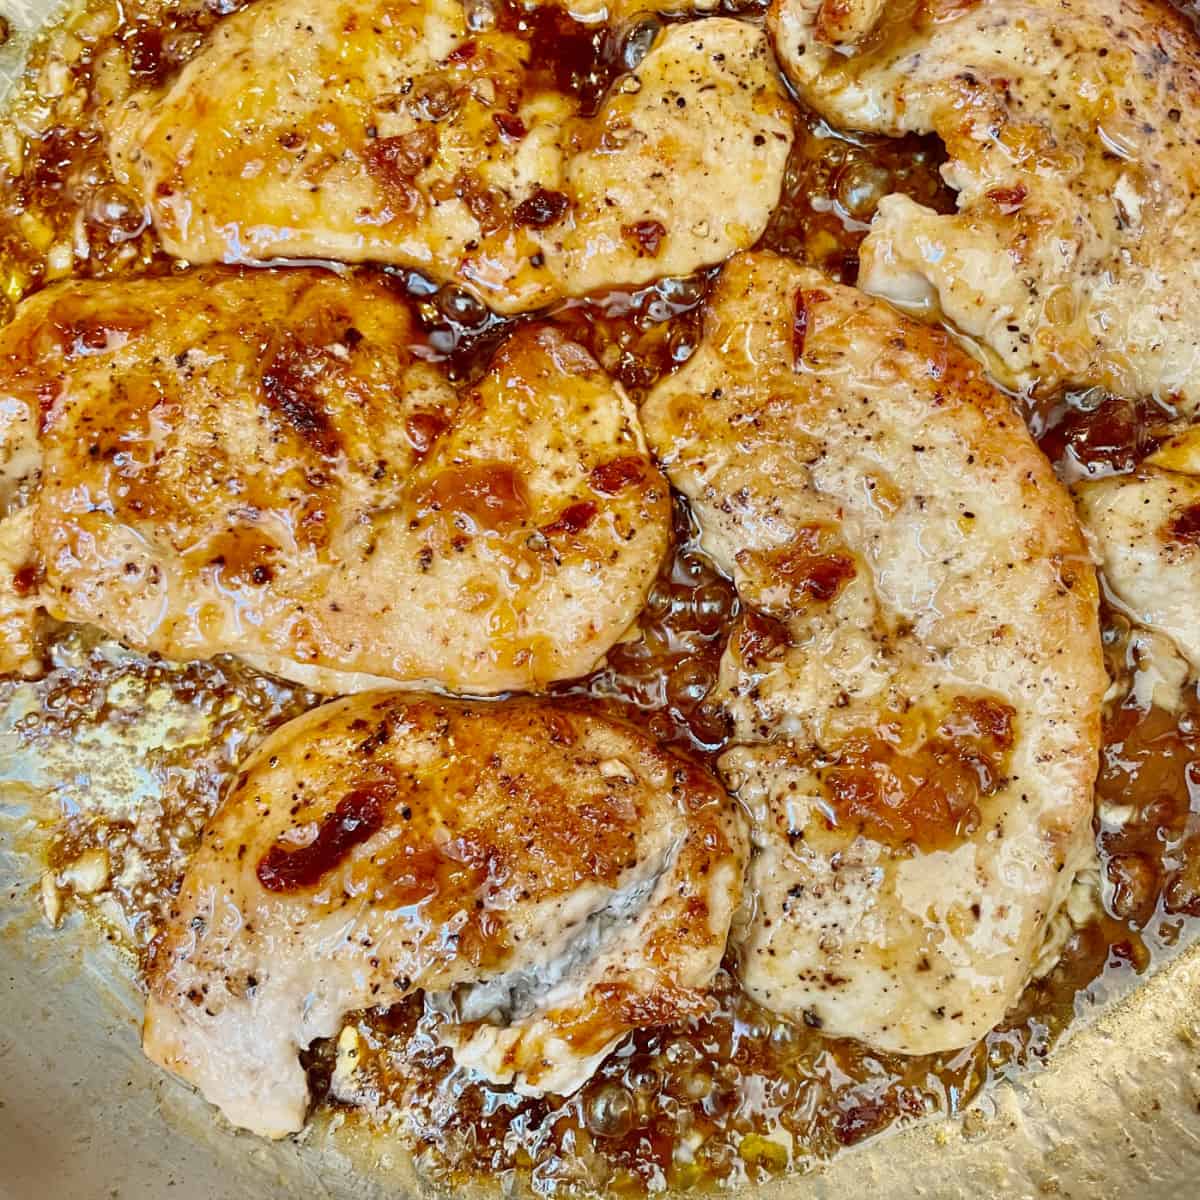 Glazed cutlets in the pan being tossed in sauce.